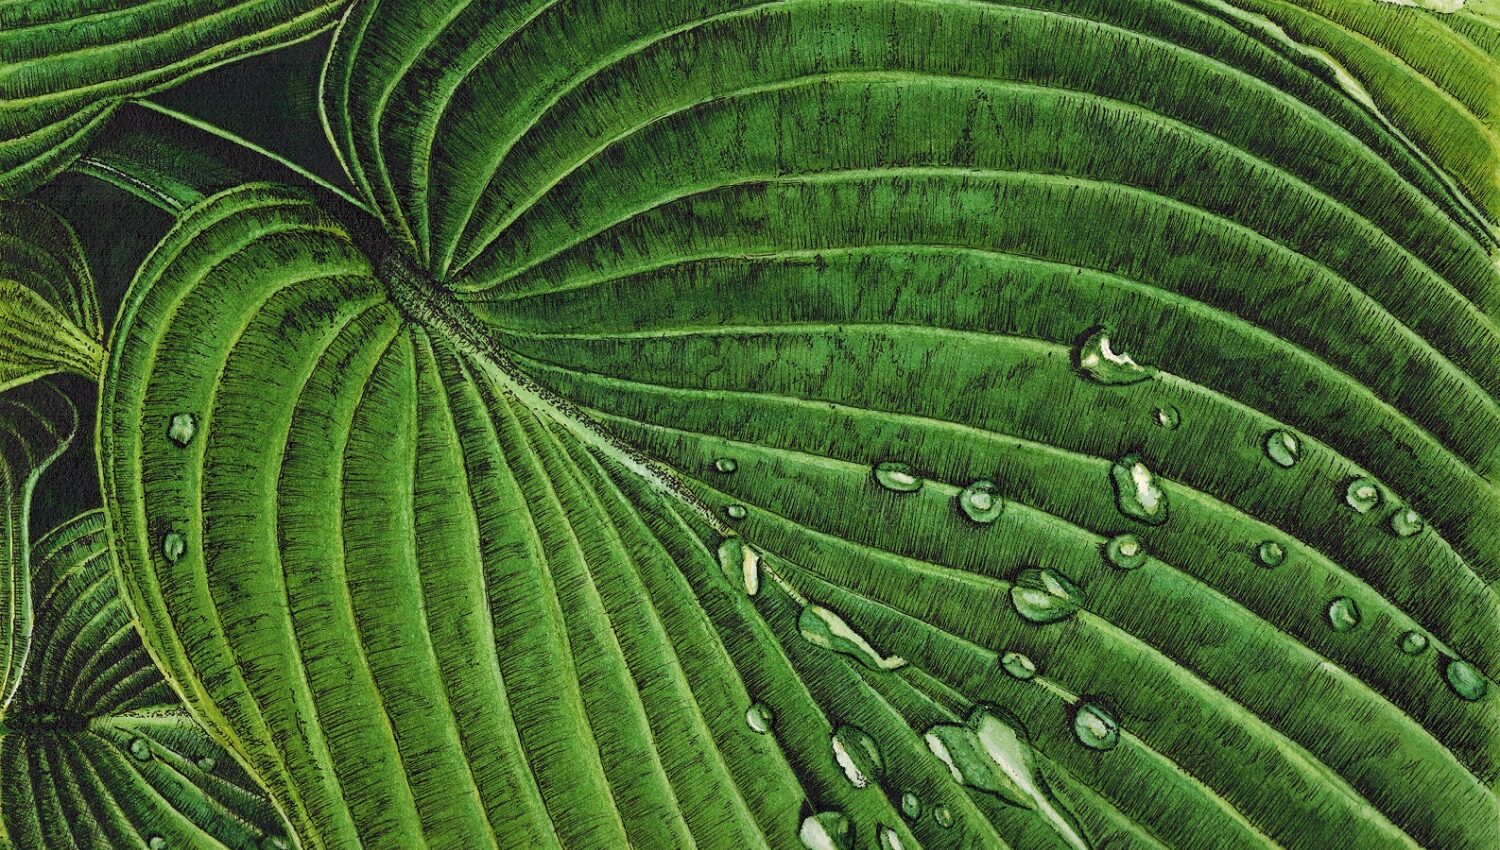 Hosta Leaf with Water Droplets